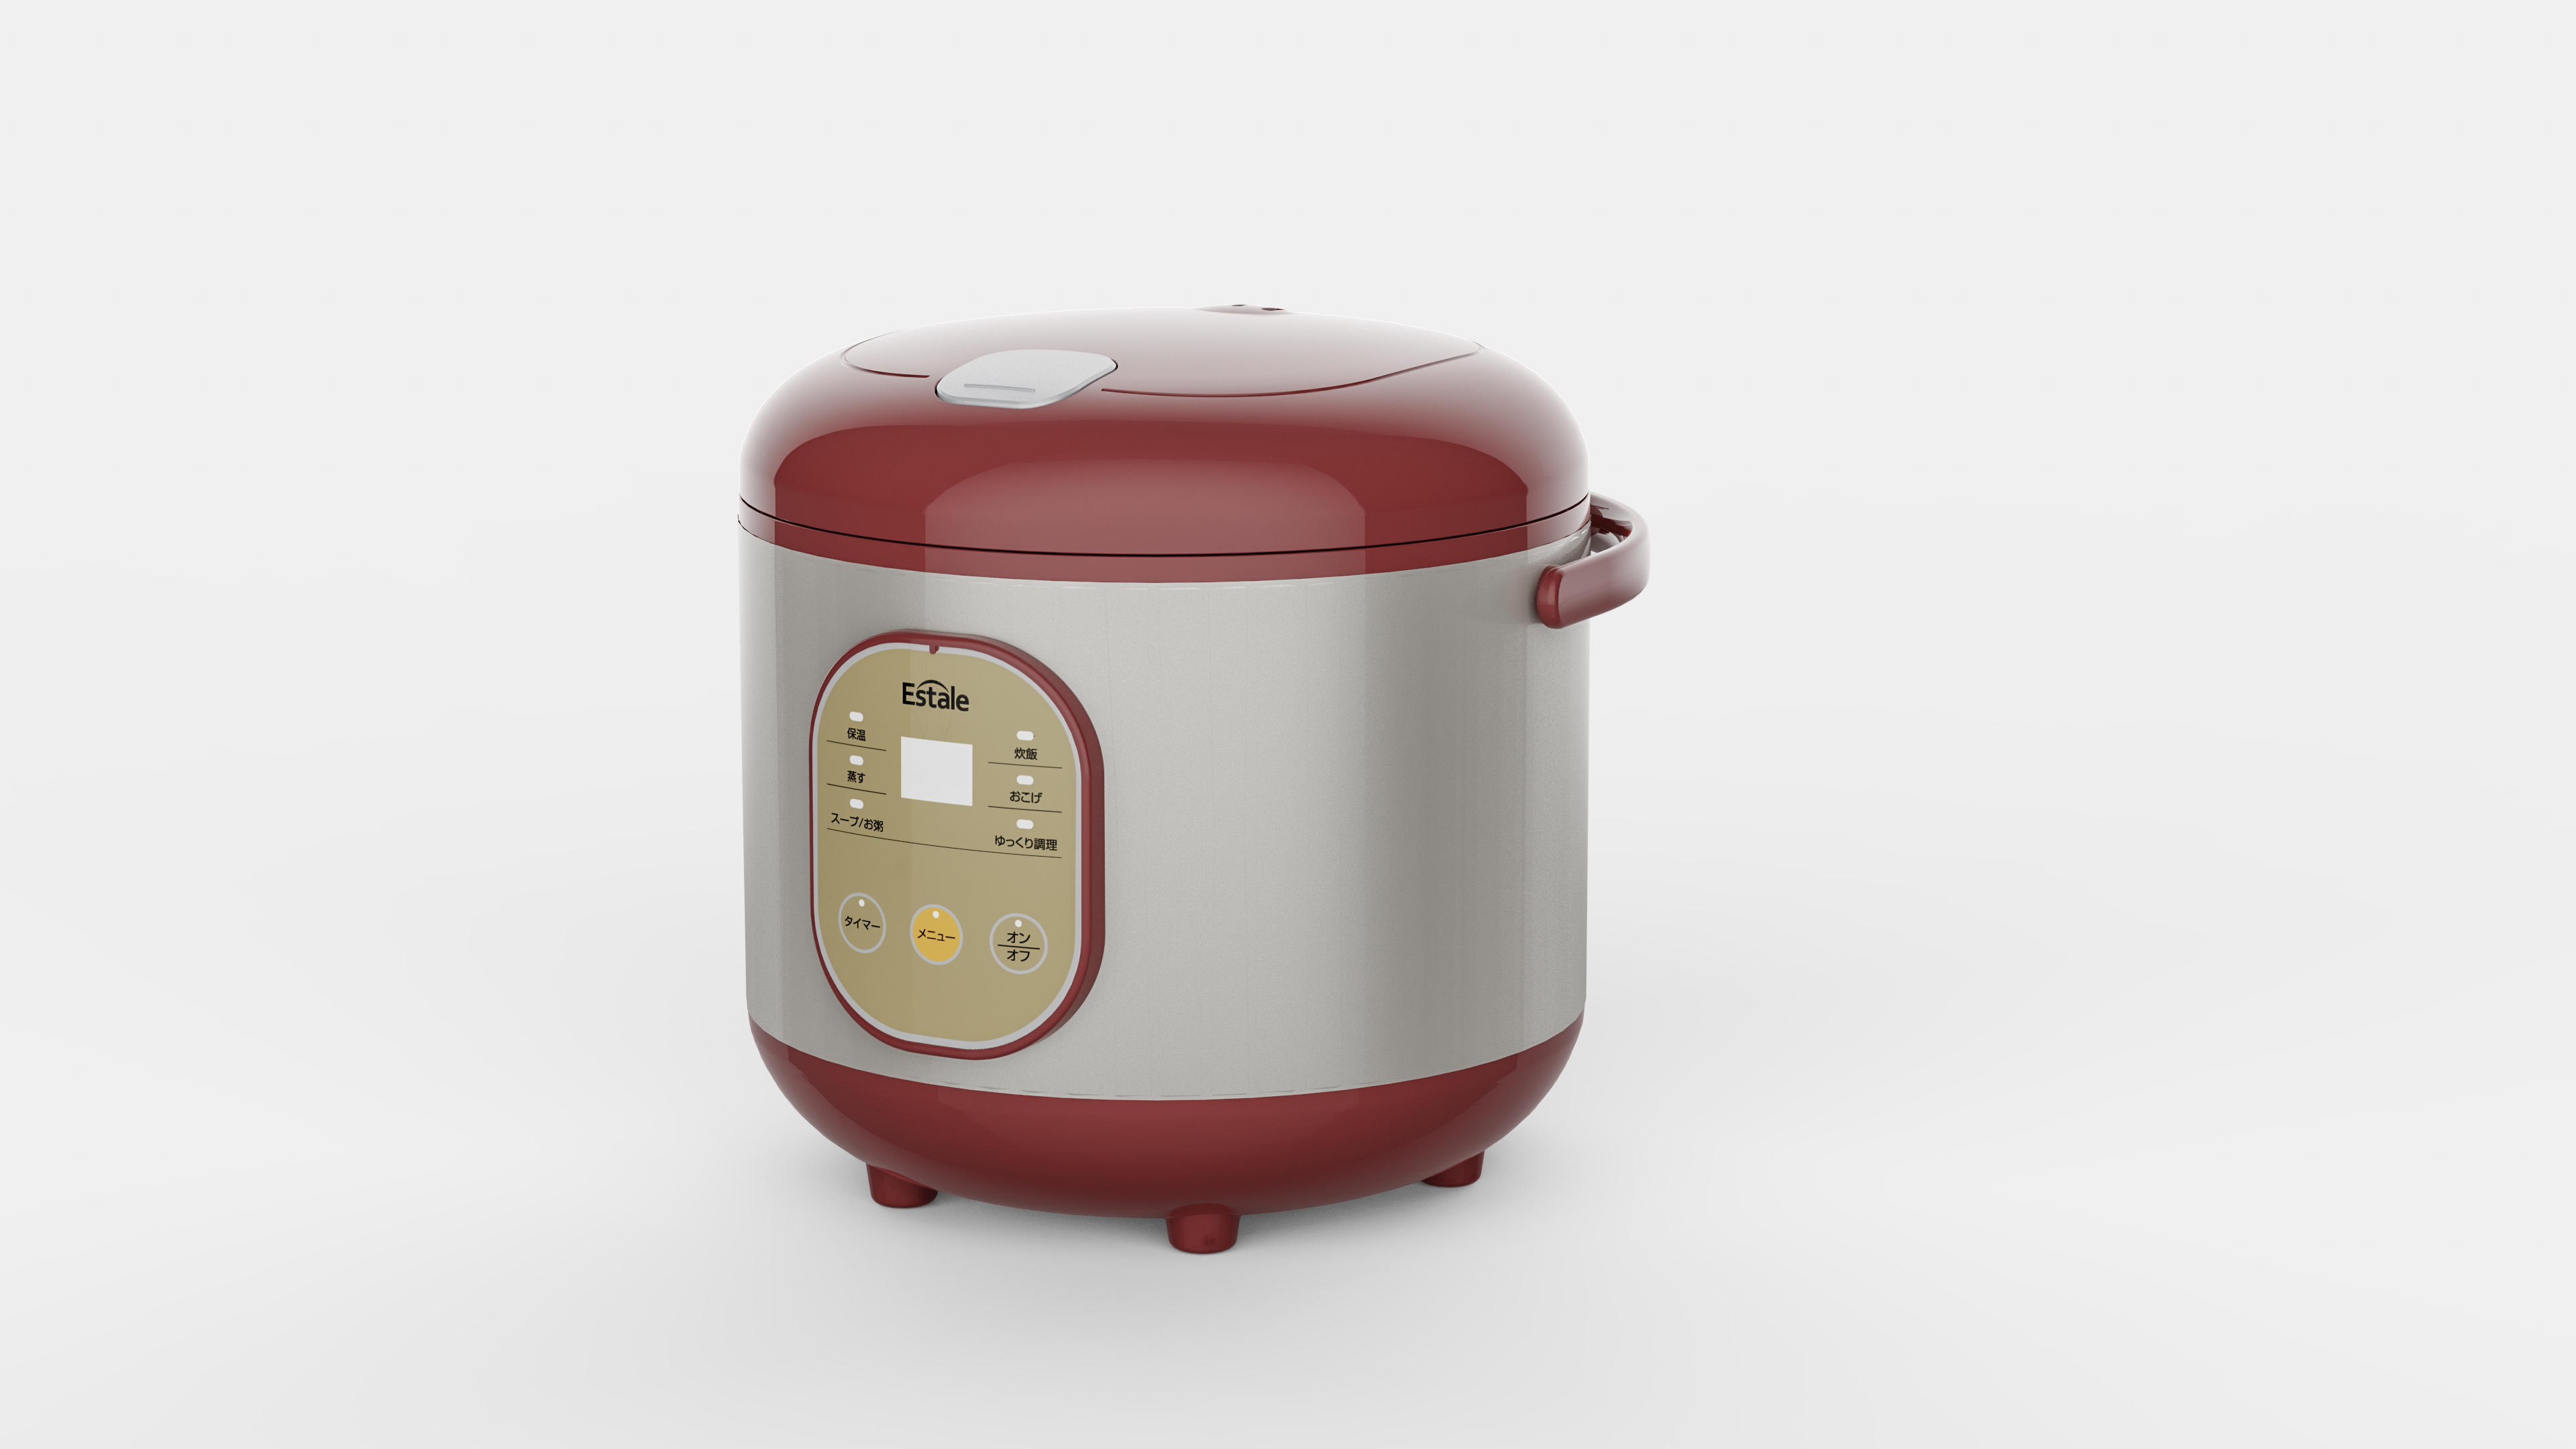 Automatic Multifunction Electric Pot Wholesale: A Boon for Modern Kitchens